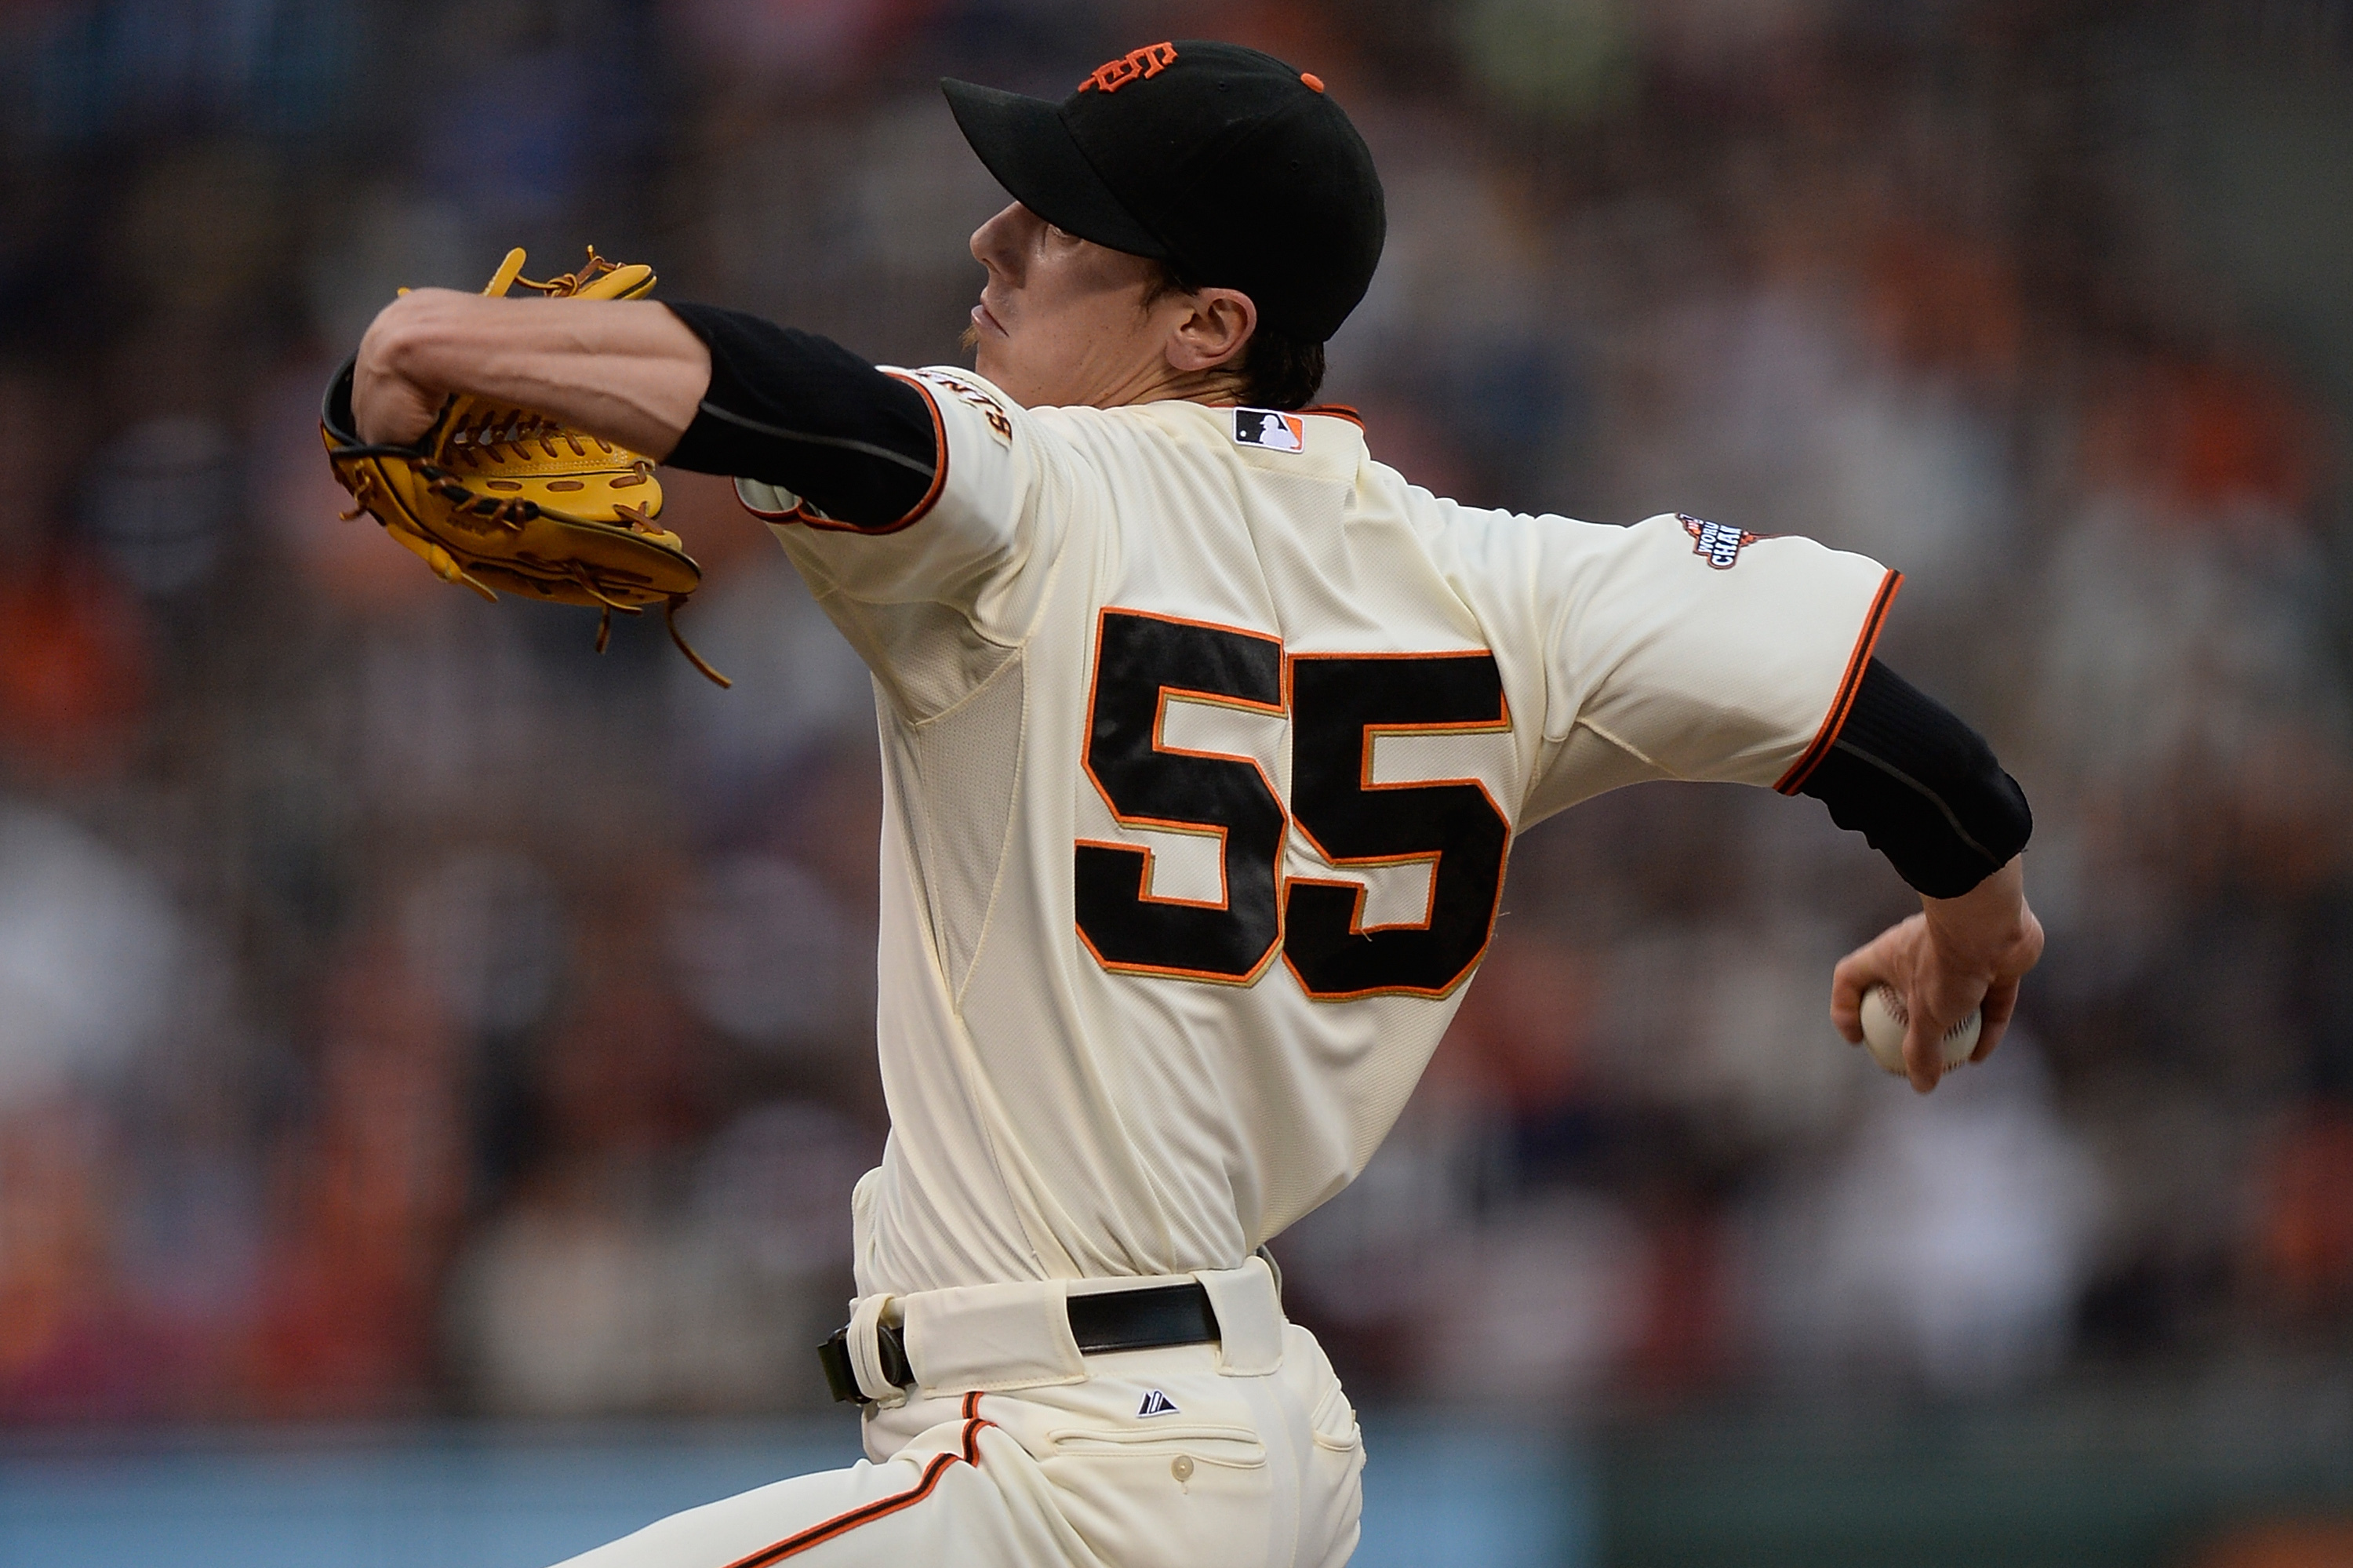 Giants' right-hander Lincecum threw 148 pitches in no-hitter